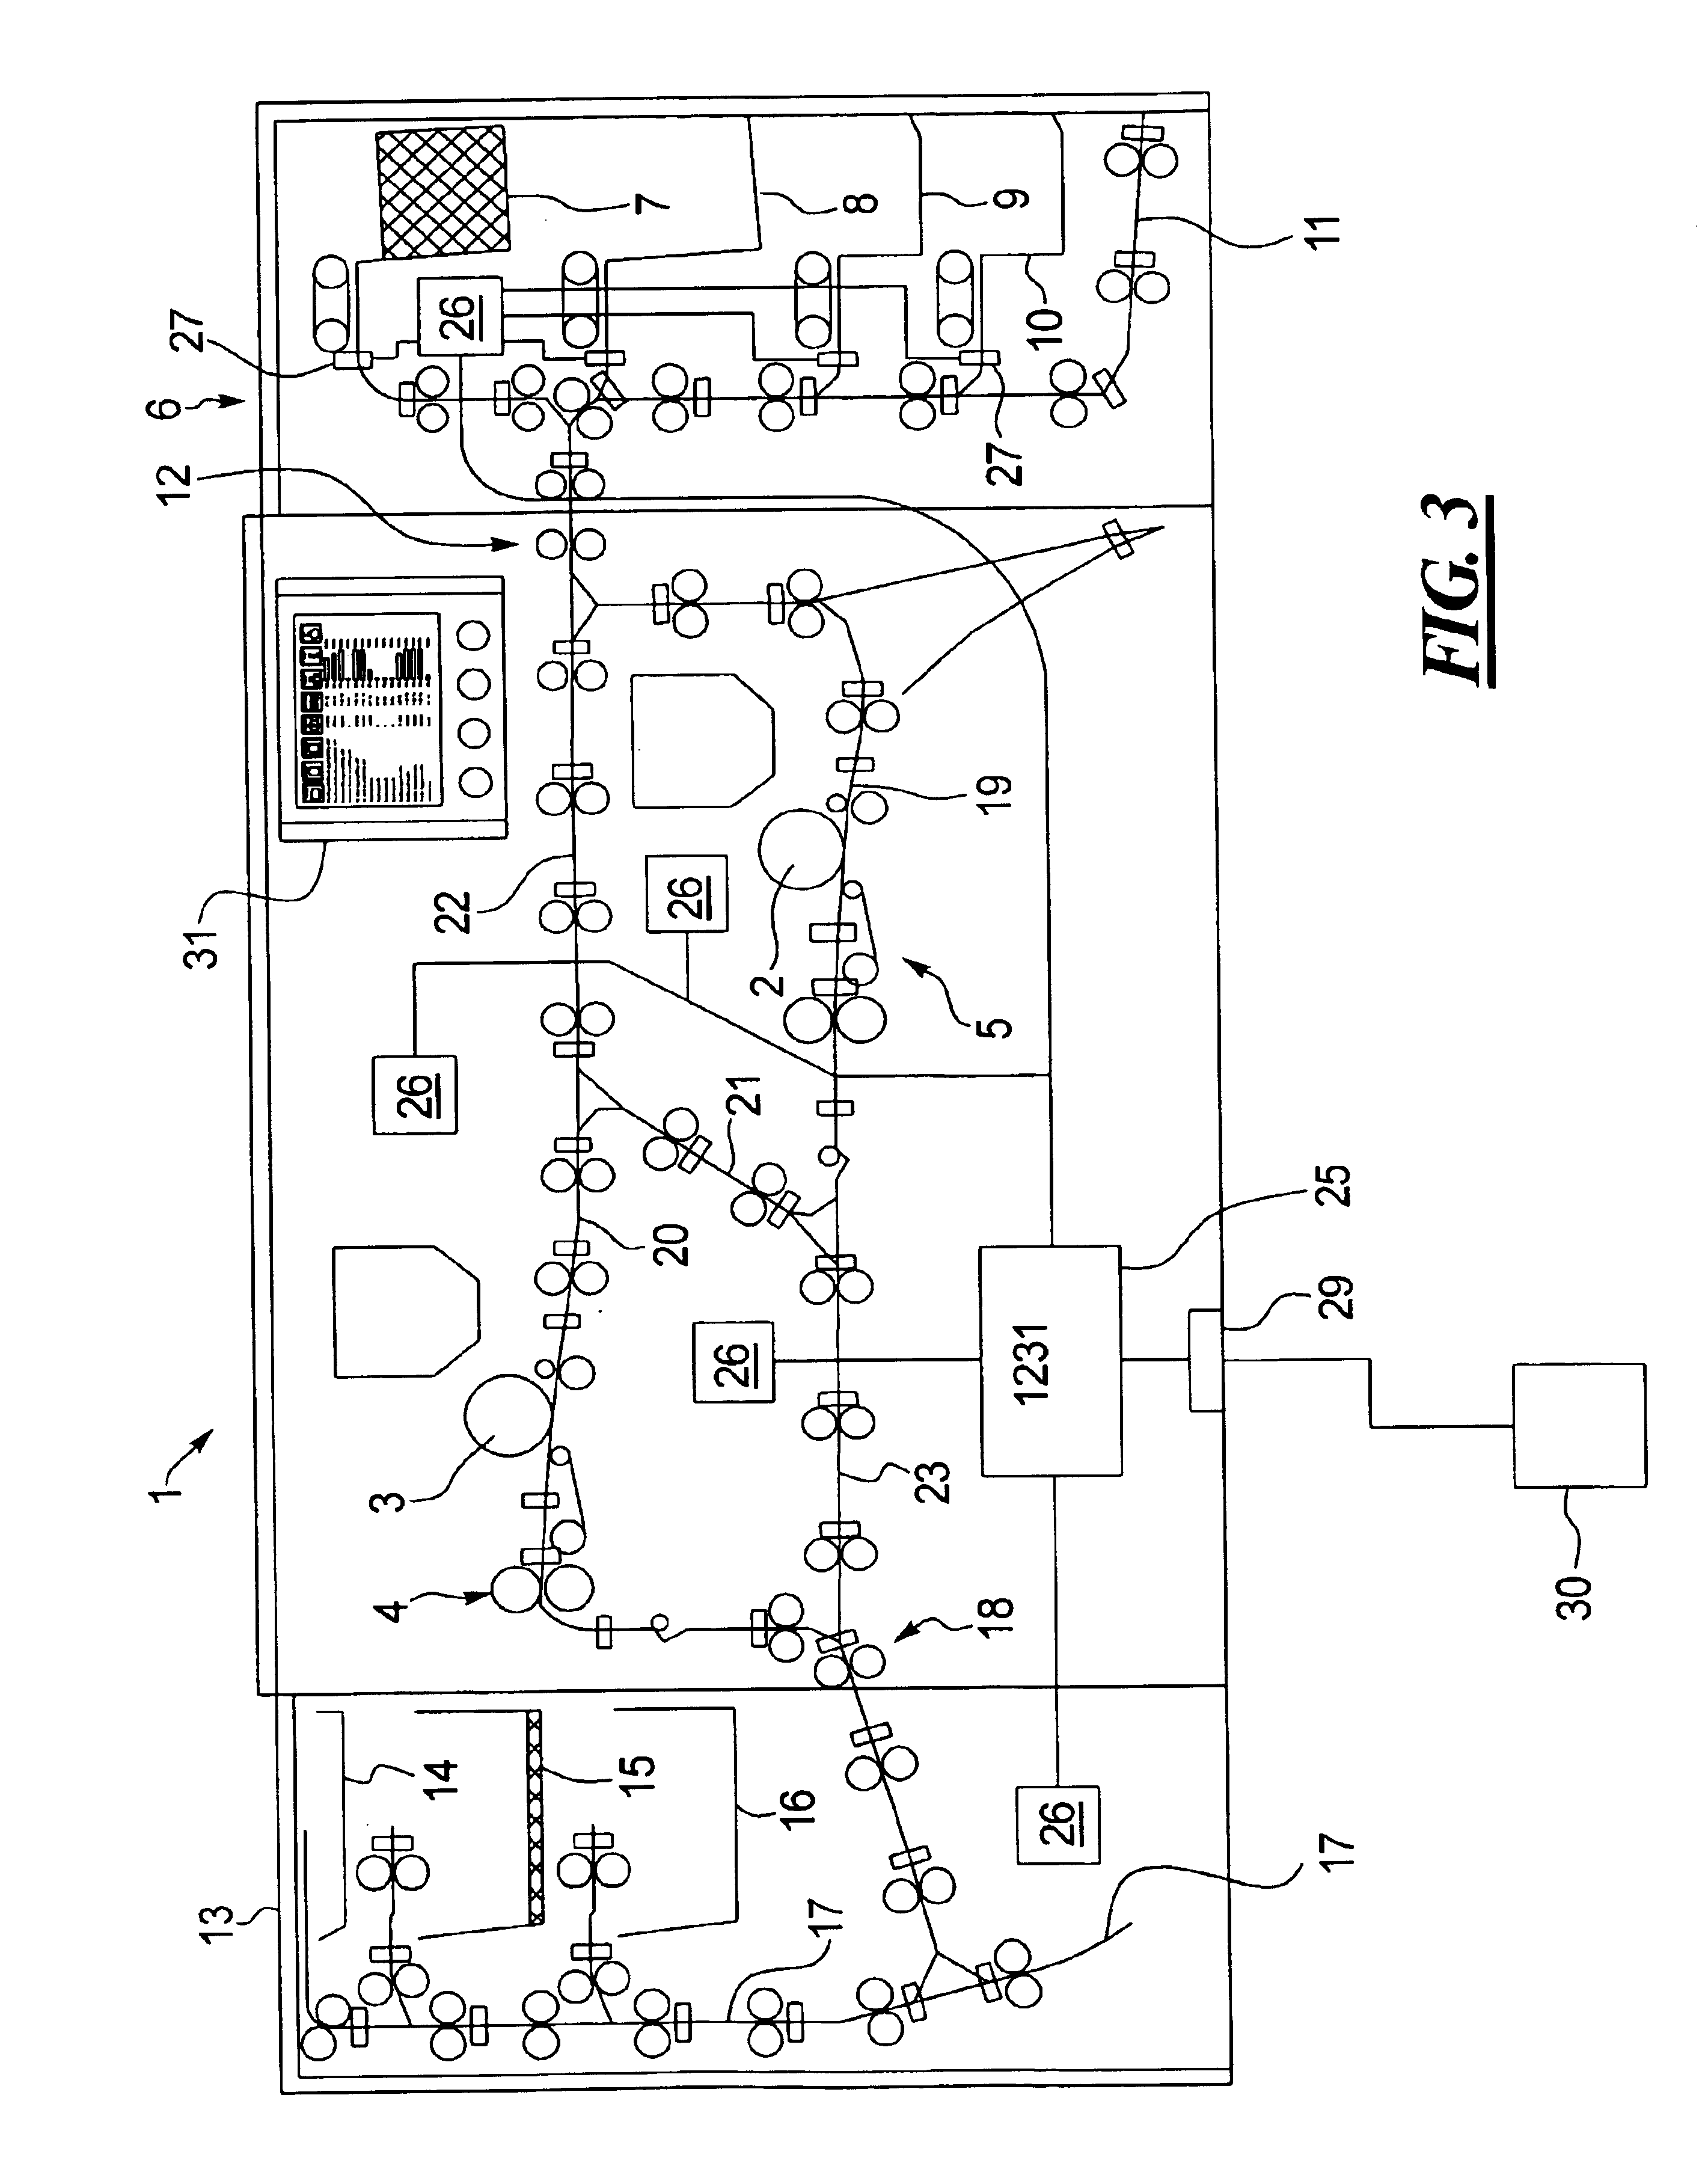 Control device and method for monitoring wear parts for printers and copiers